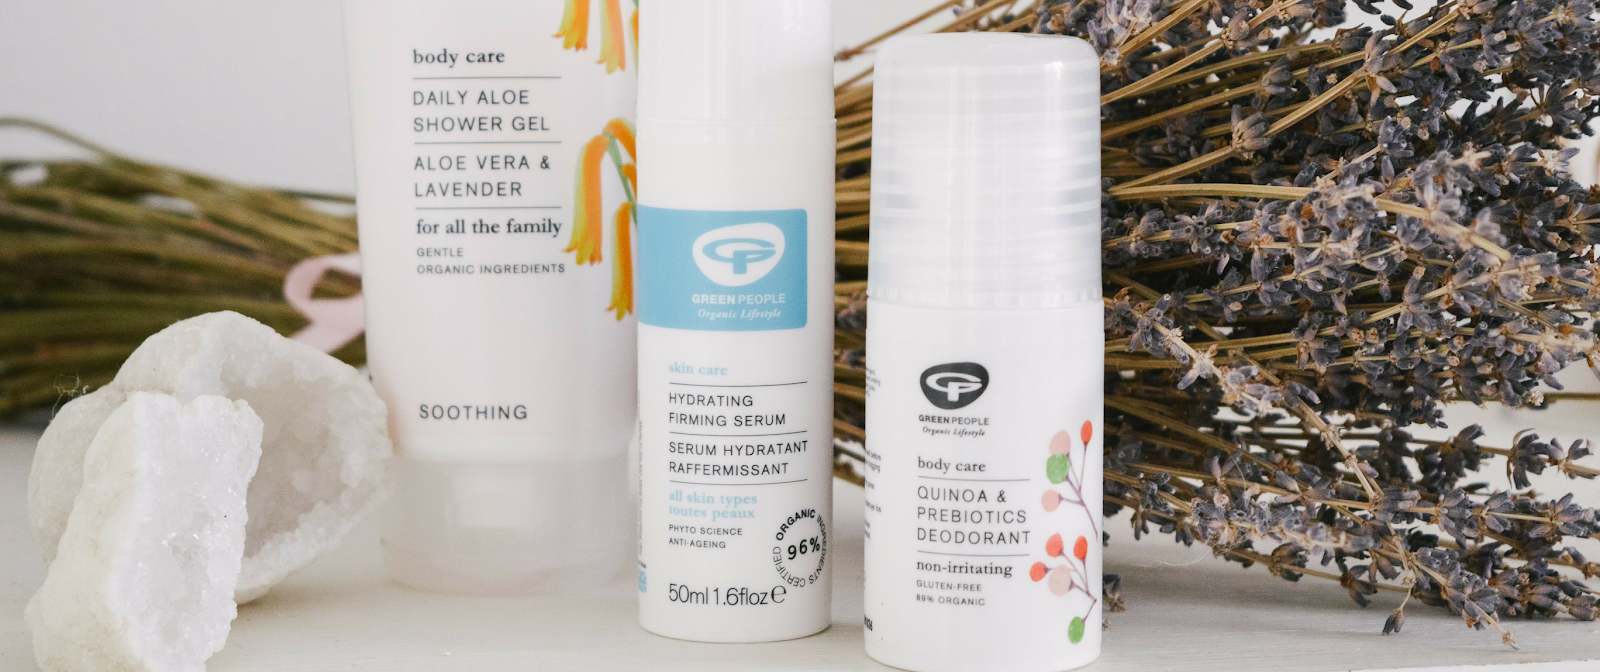 Green People organic skincare review by Dalry Rose Blog, Hampshire lifestyle blogger